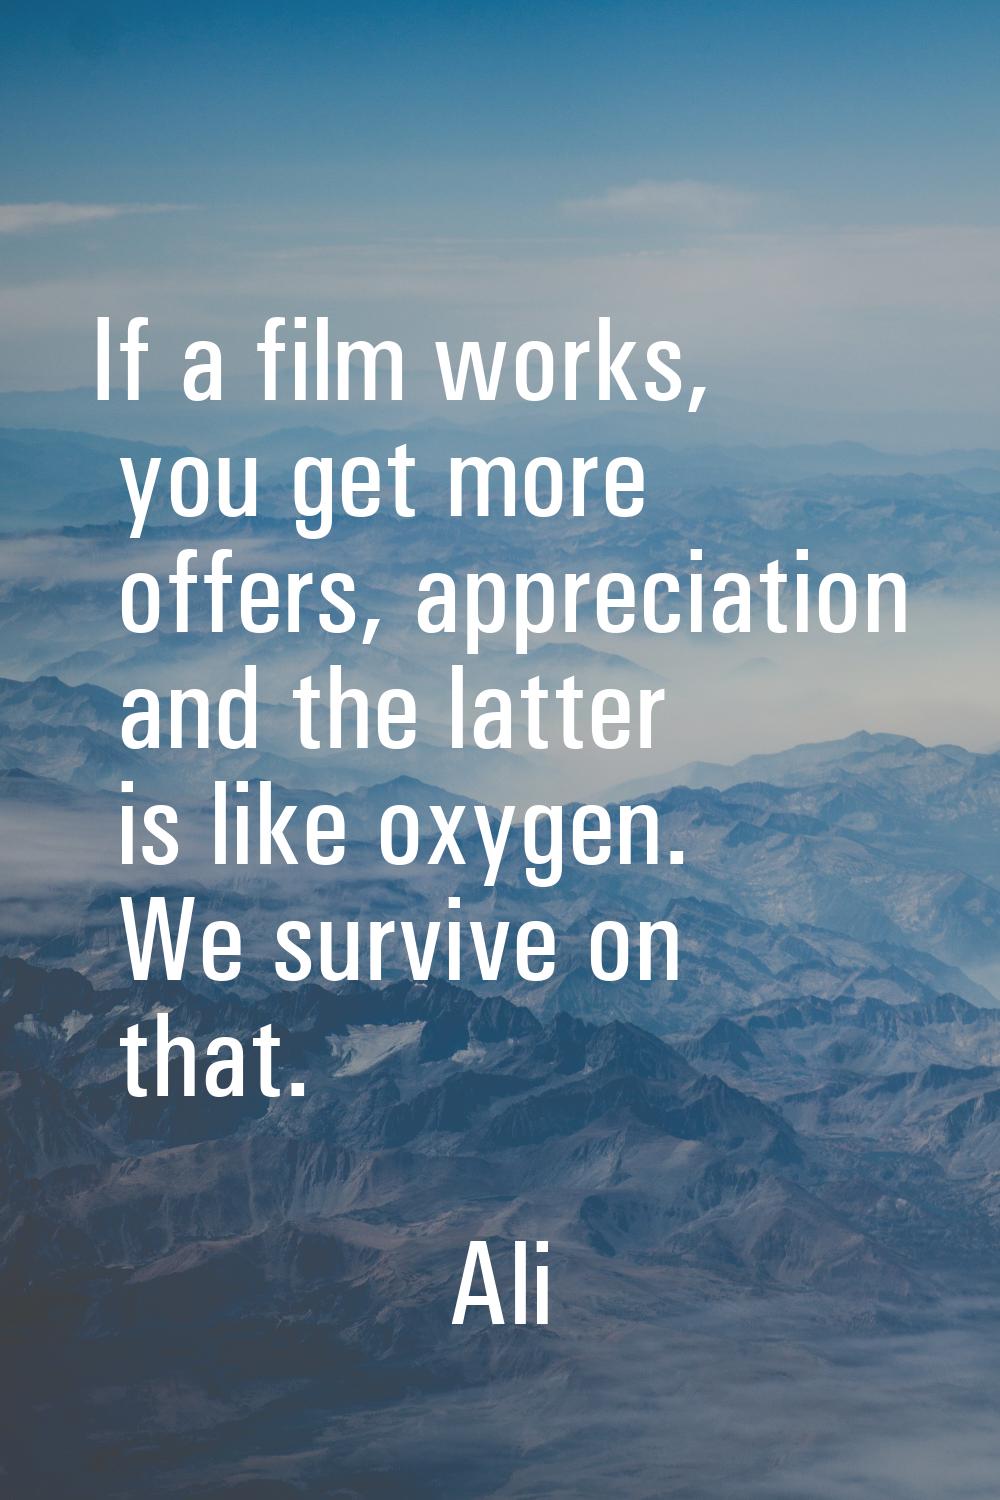 If a film works, you get more offers, appreciation and the latter is like oxygen. We survive on tha